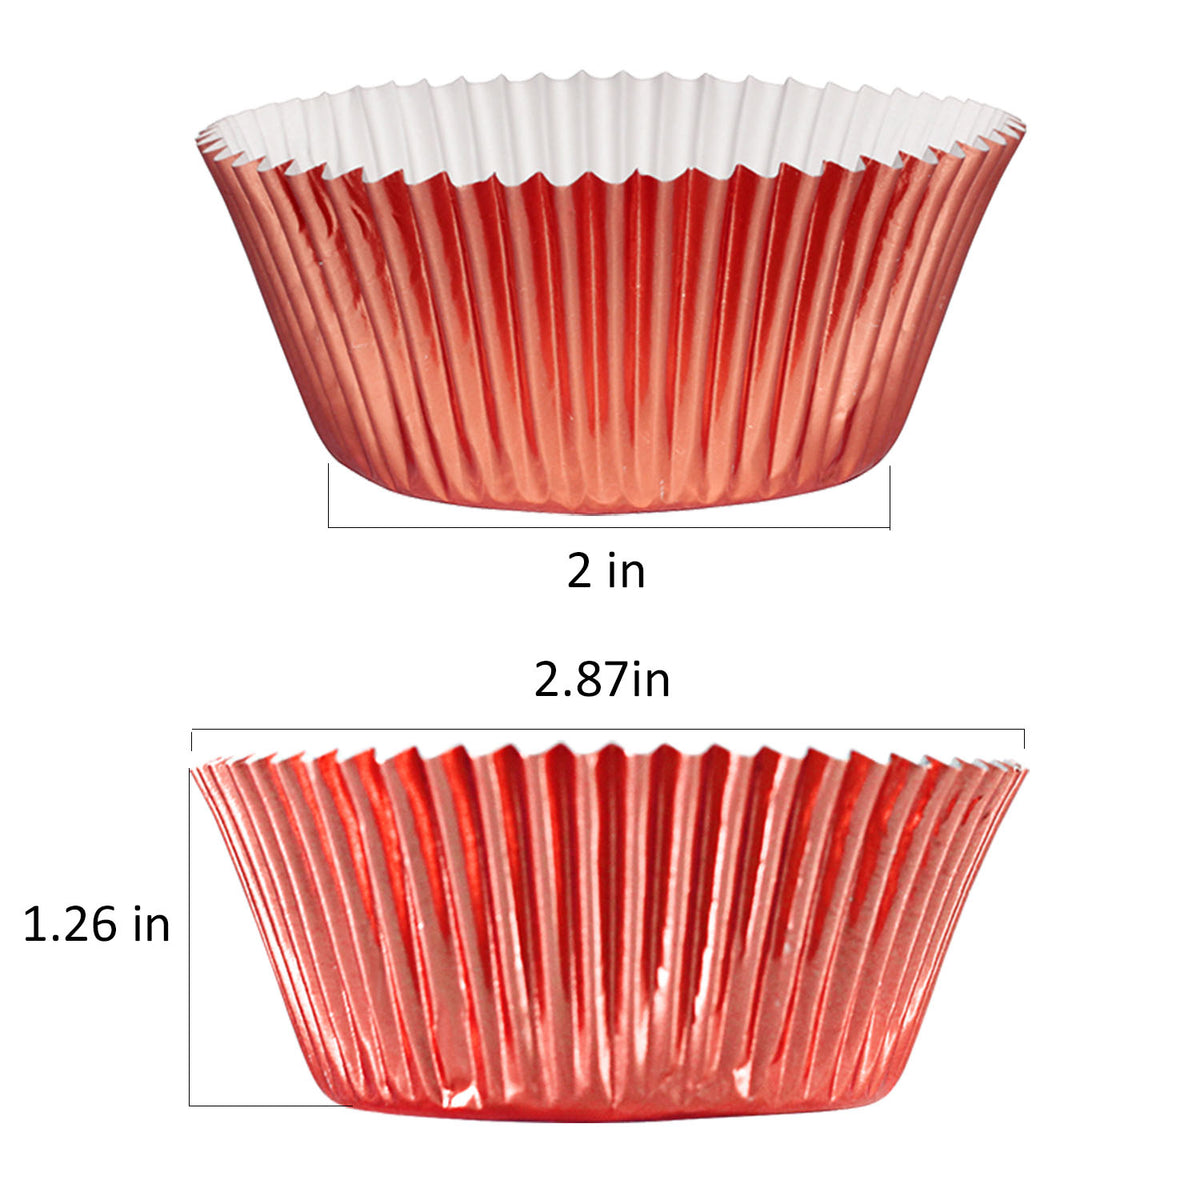 Gifbera Standard Red Foil Cupcake Liners 200-Count